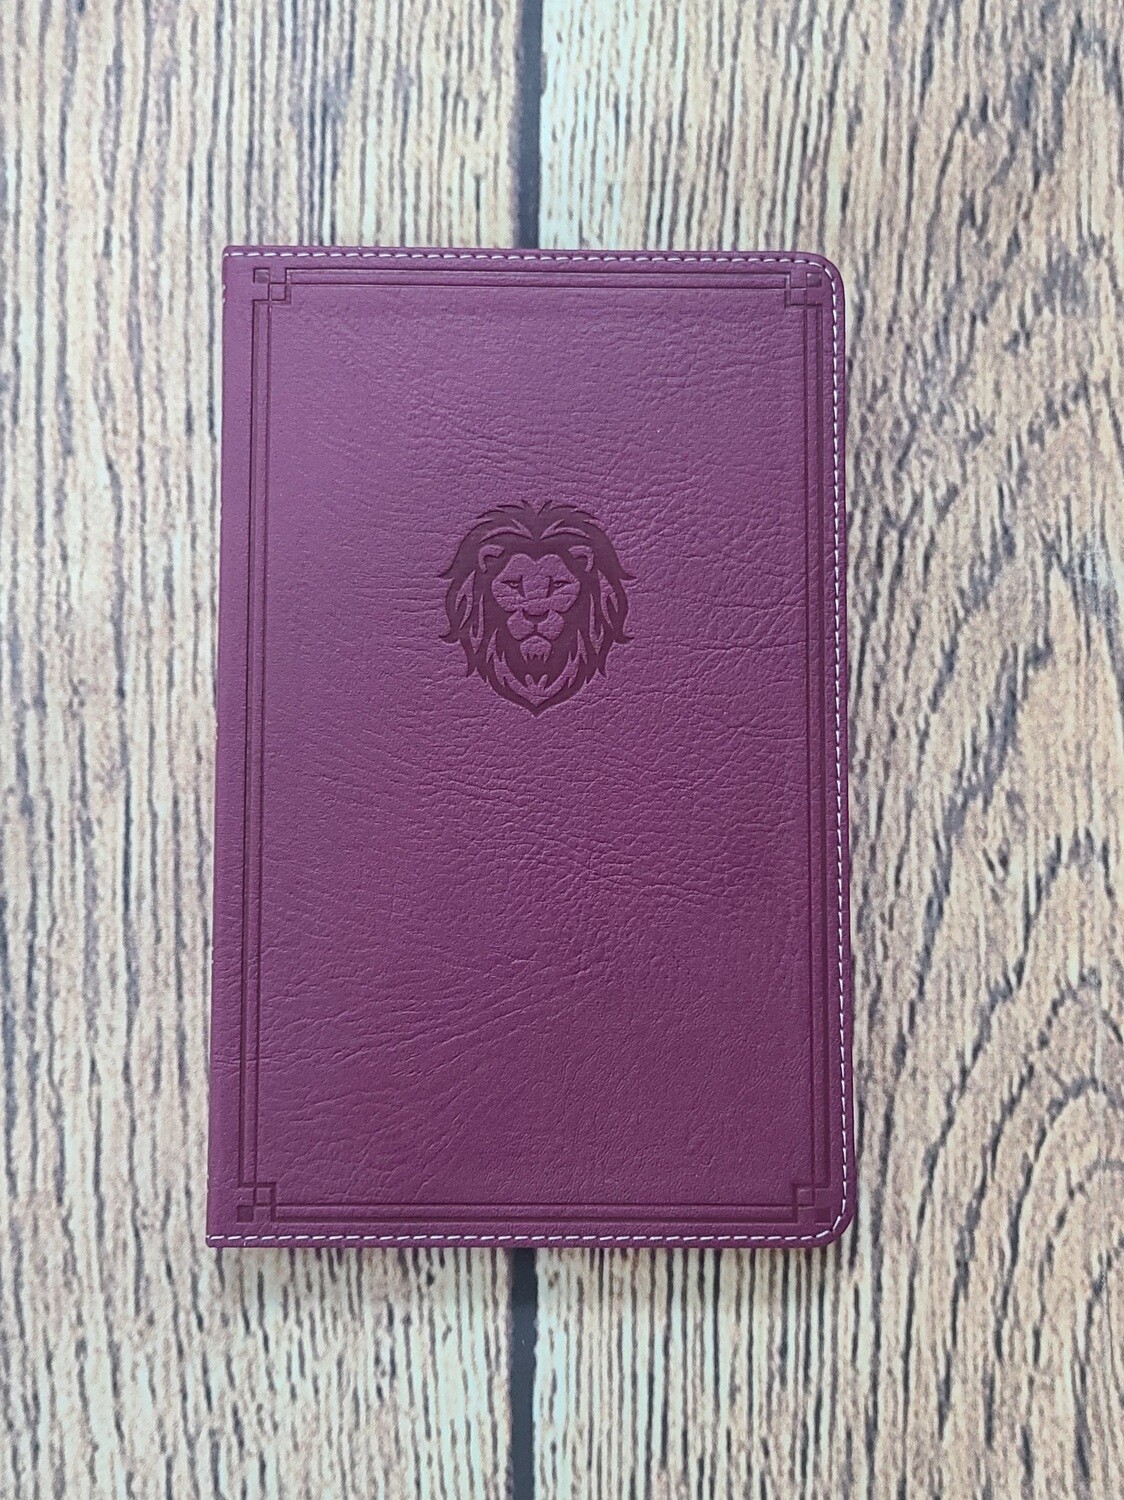 KJV Thinline Bible - Youth Edition - Berry Leathersoft